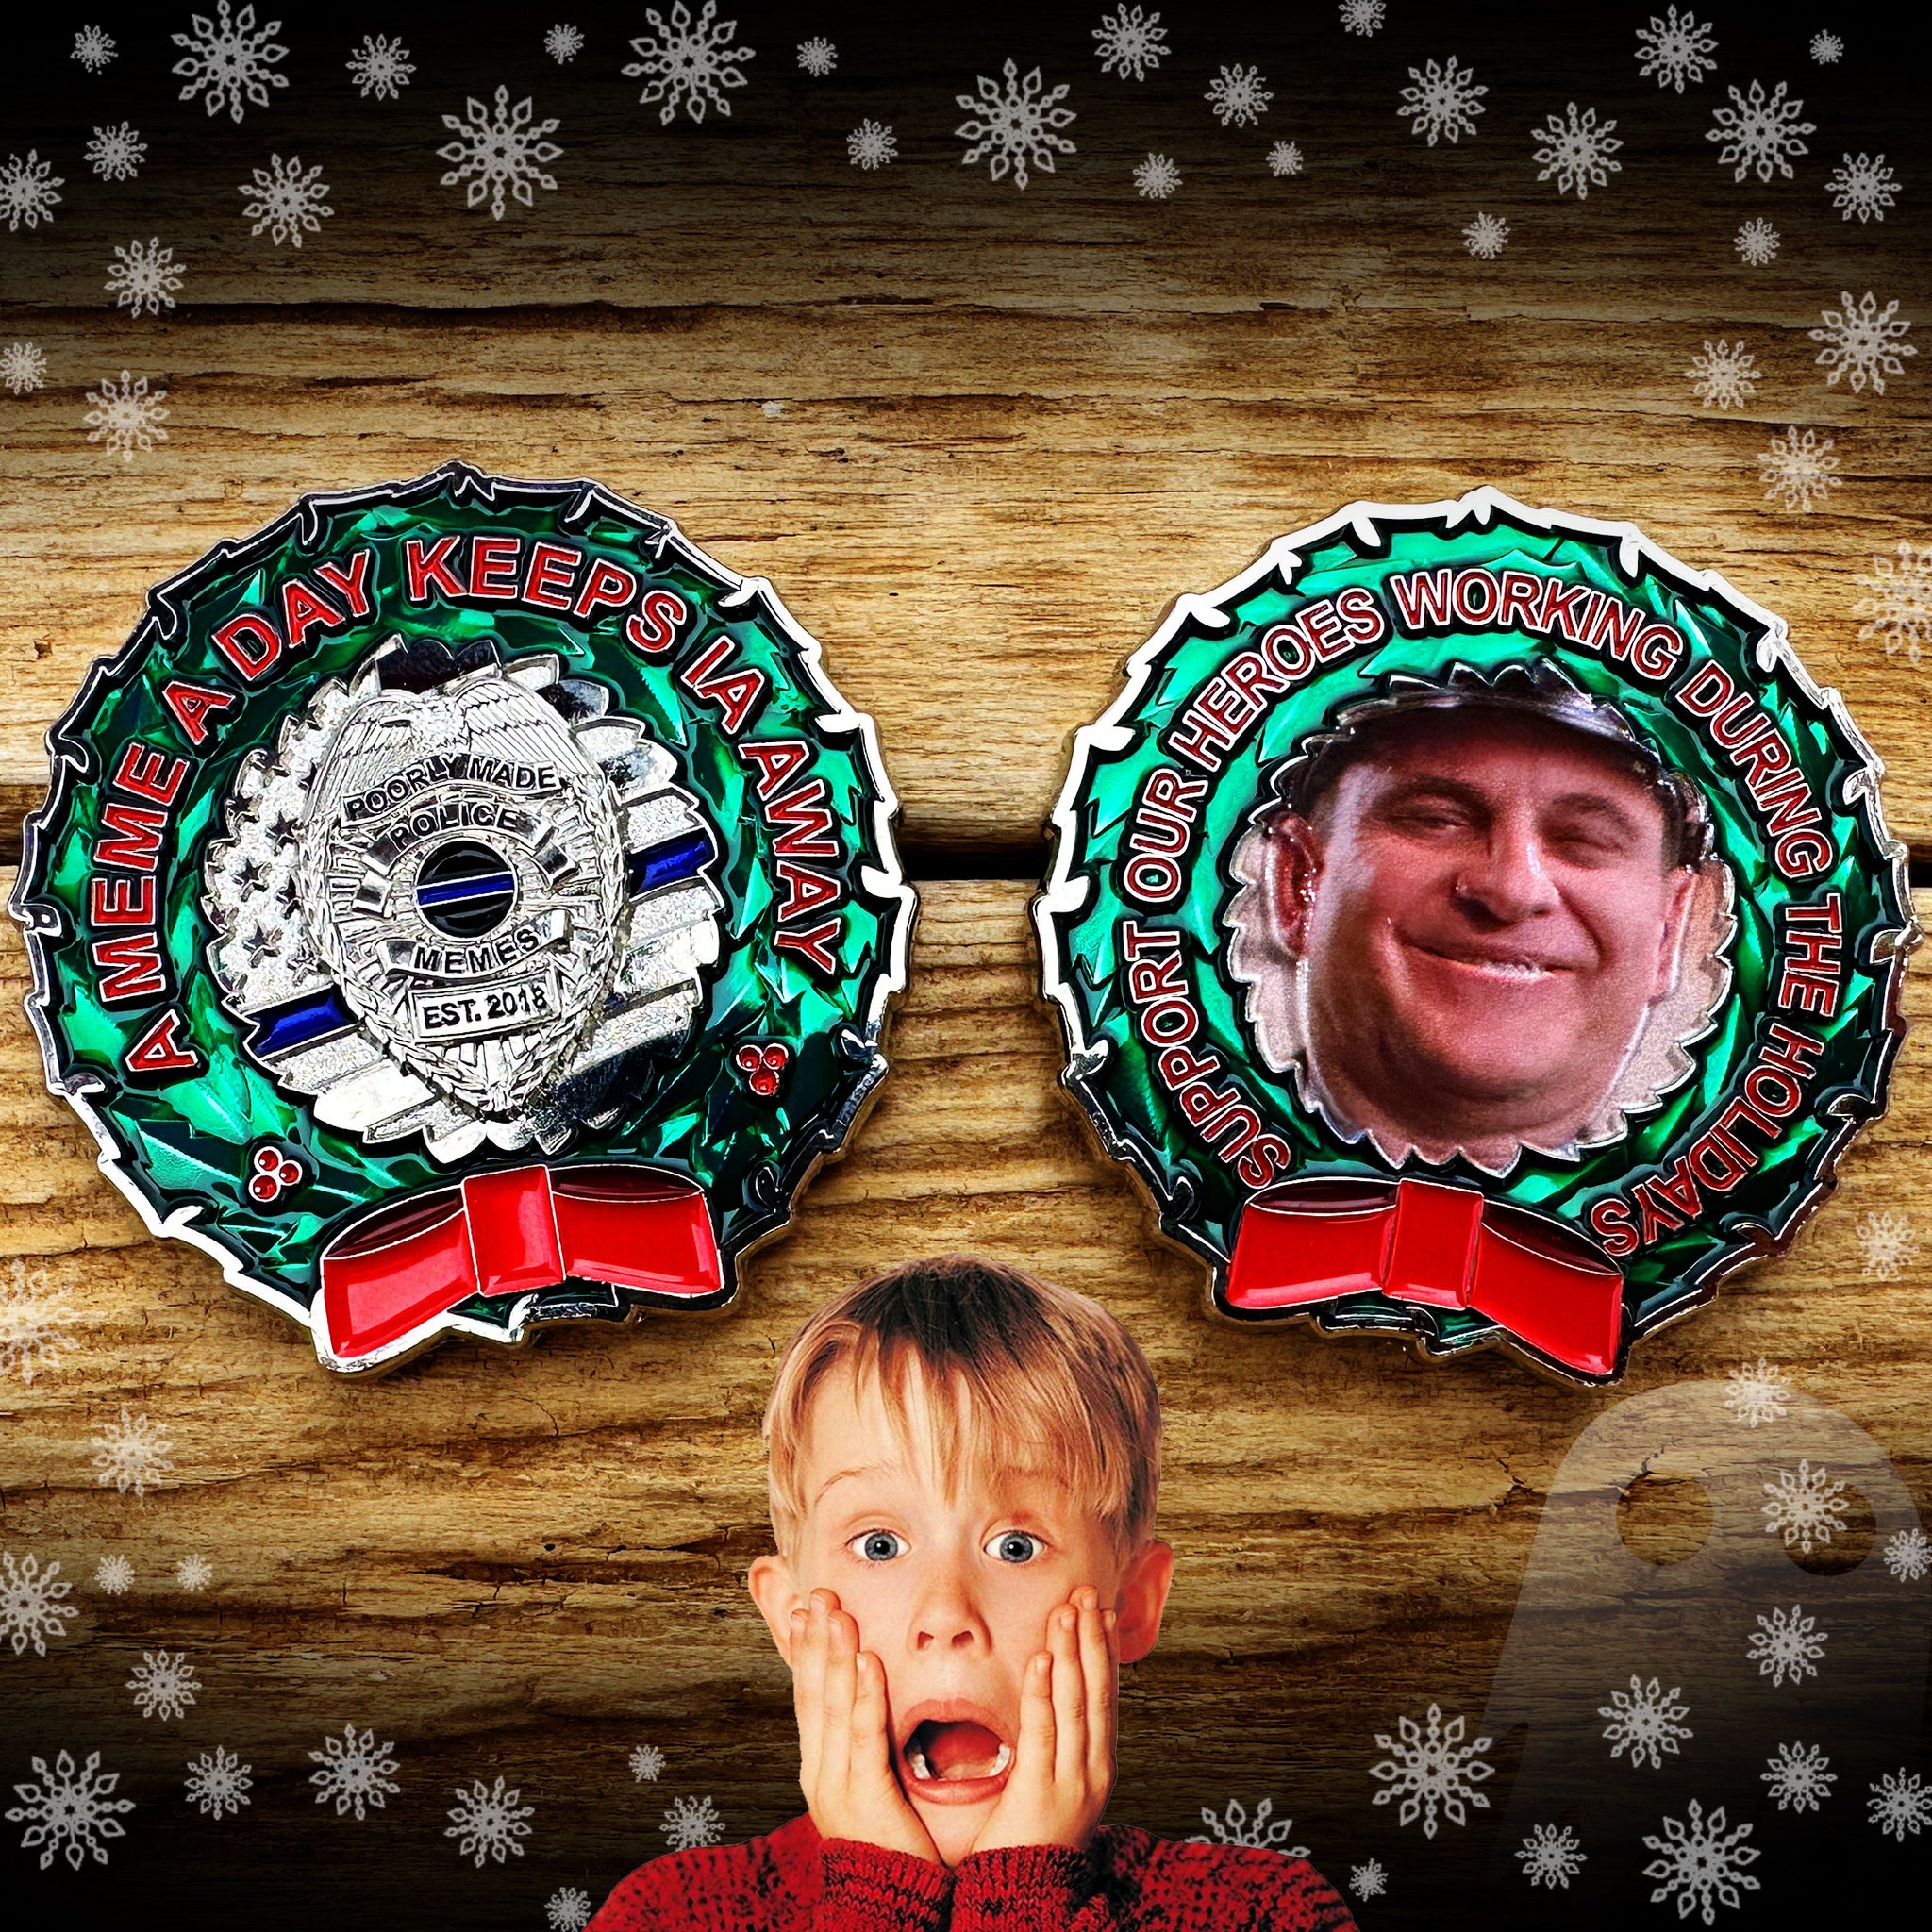 Official Poorly Made Police Memes Christmas Coin